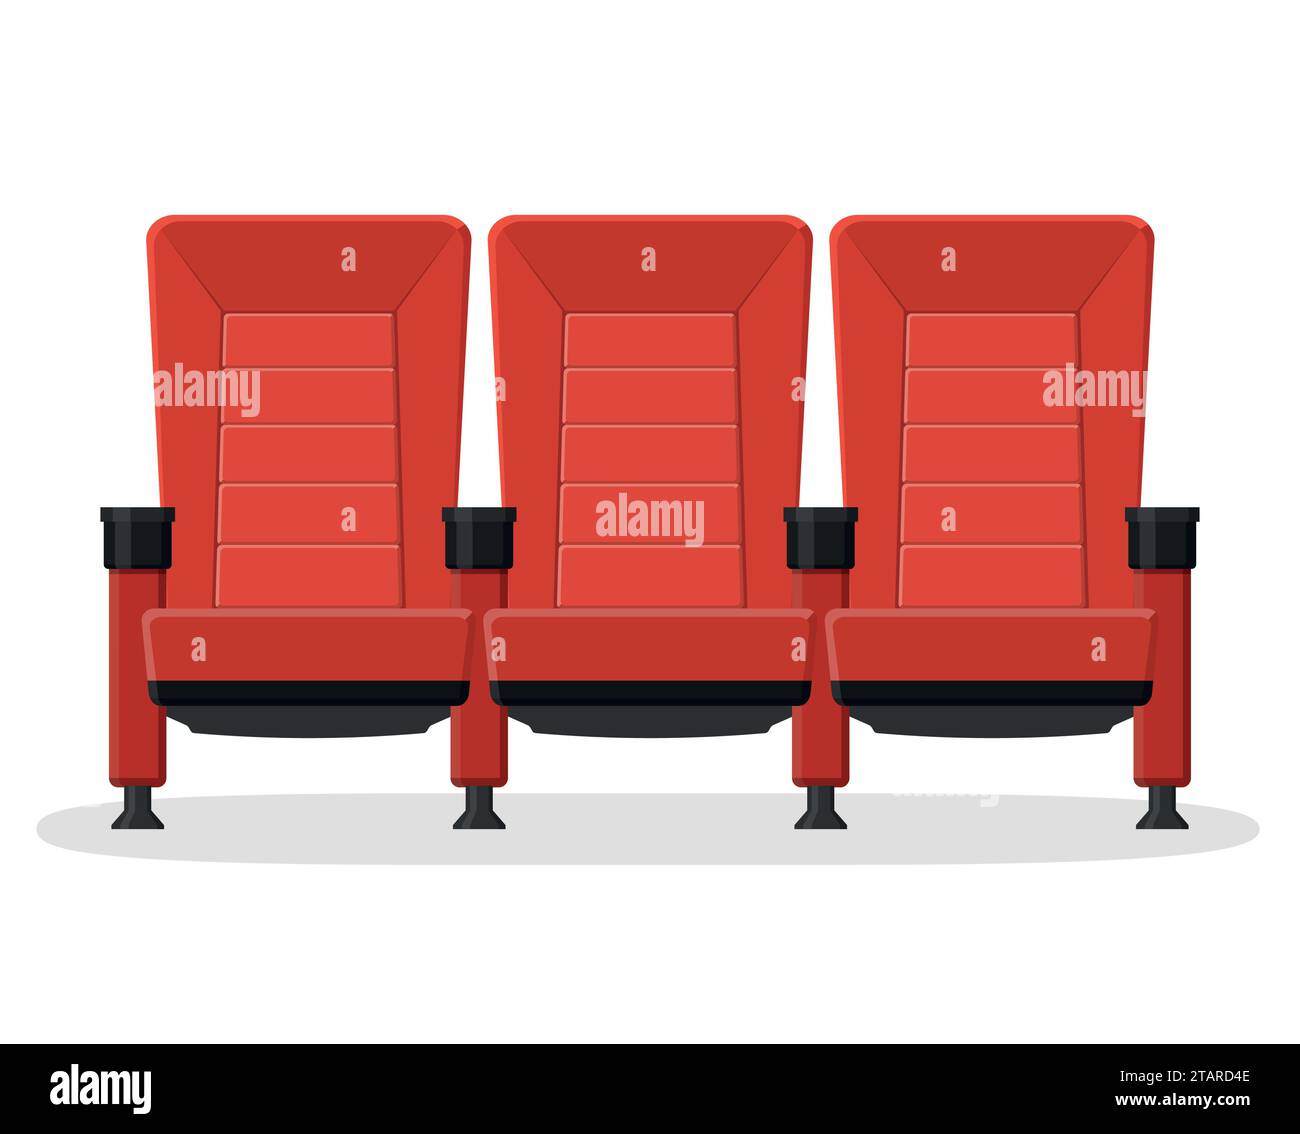 Cinema red comfortable seat for watching movies isolated on white background. Red comfortable armchairs movie and film vector illustration Stock Vector